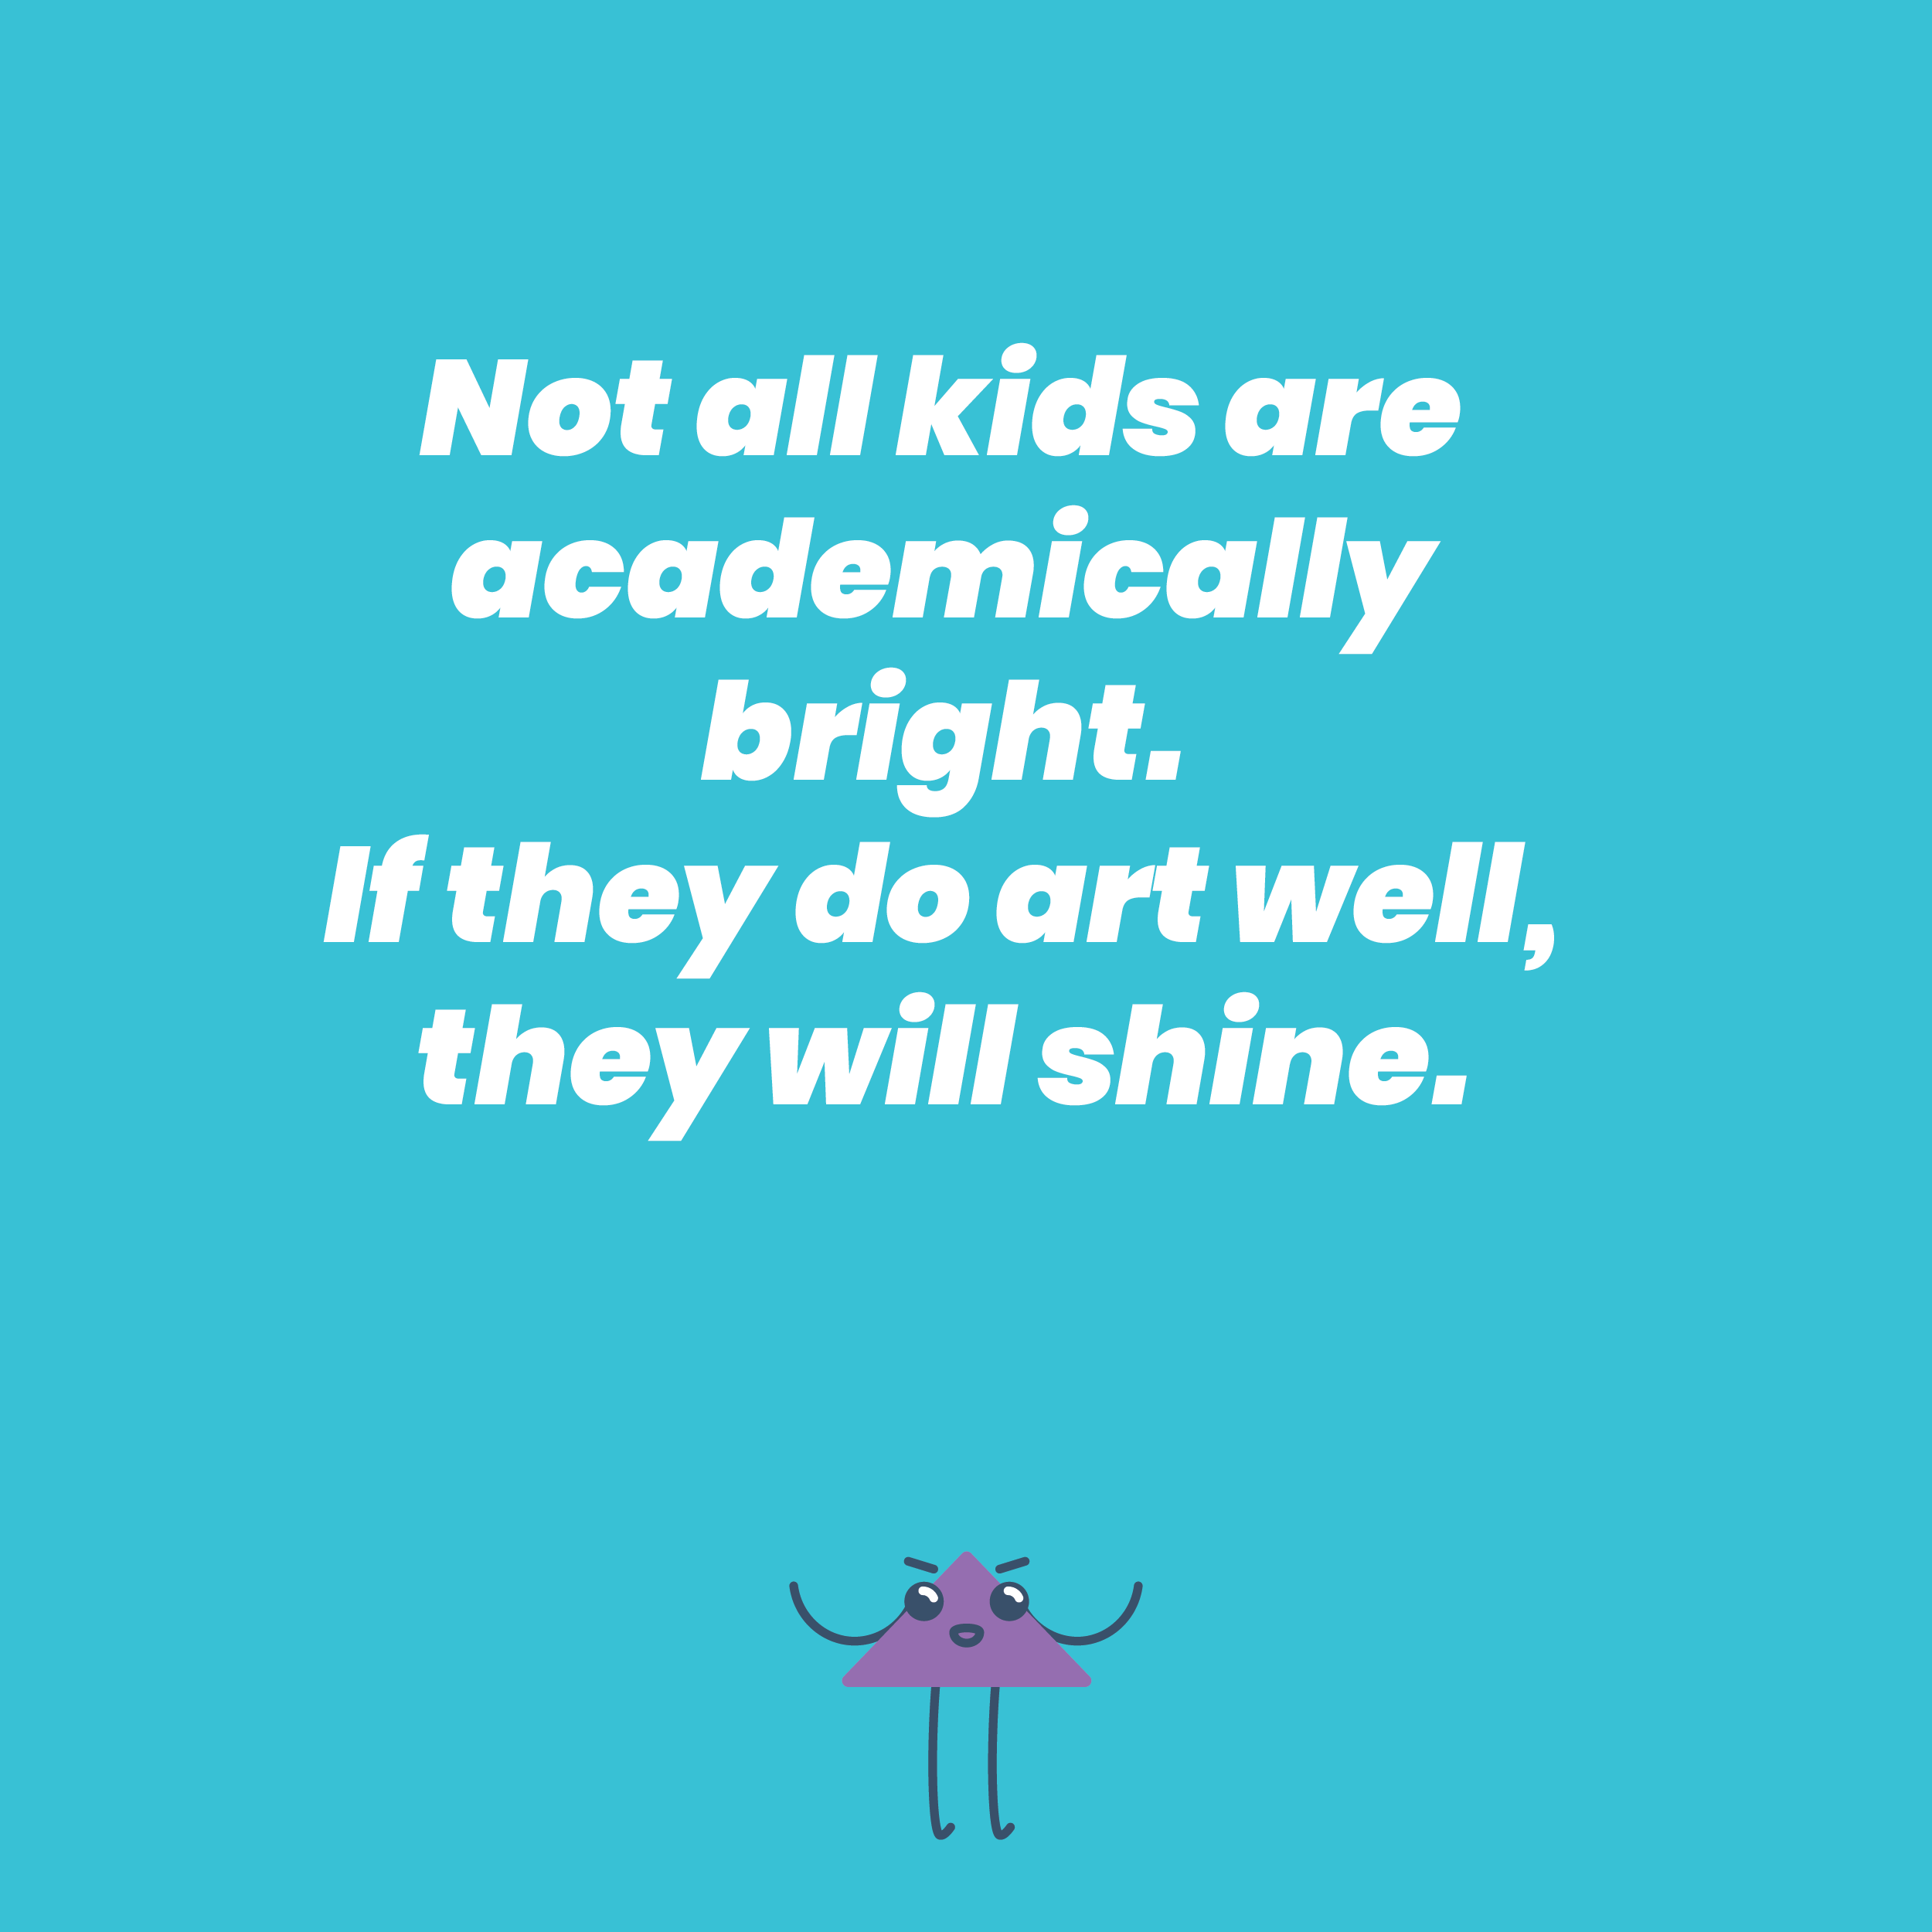 Not all kids are academically bright. If they do art well, they will shine.